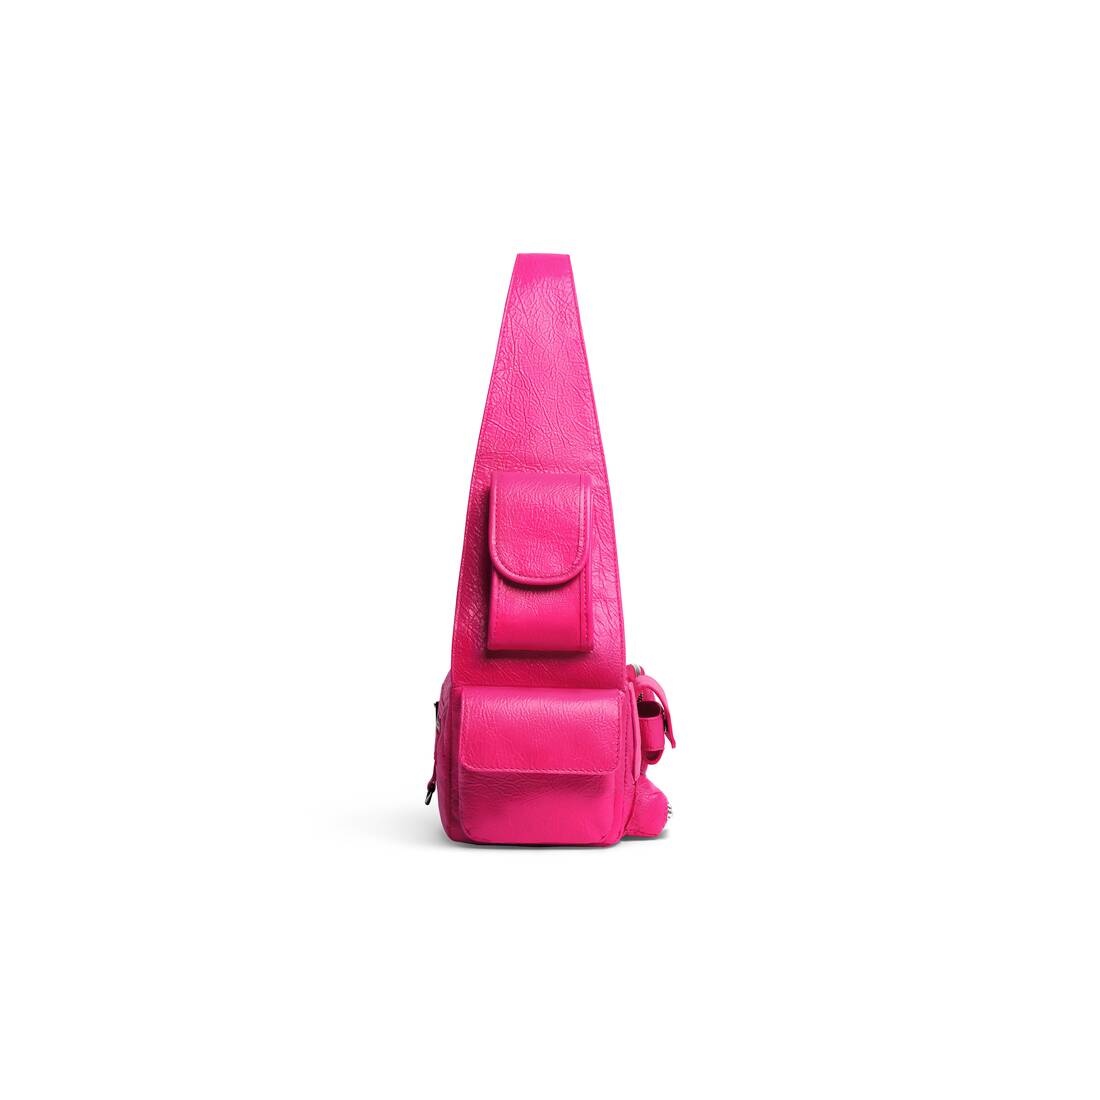 Superbusy Xs Sling Bag  in Bright Pink - 4